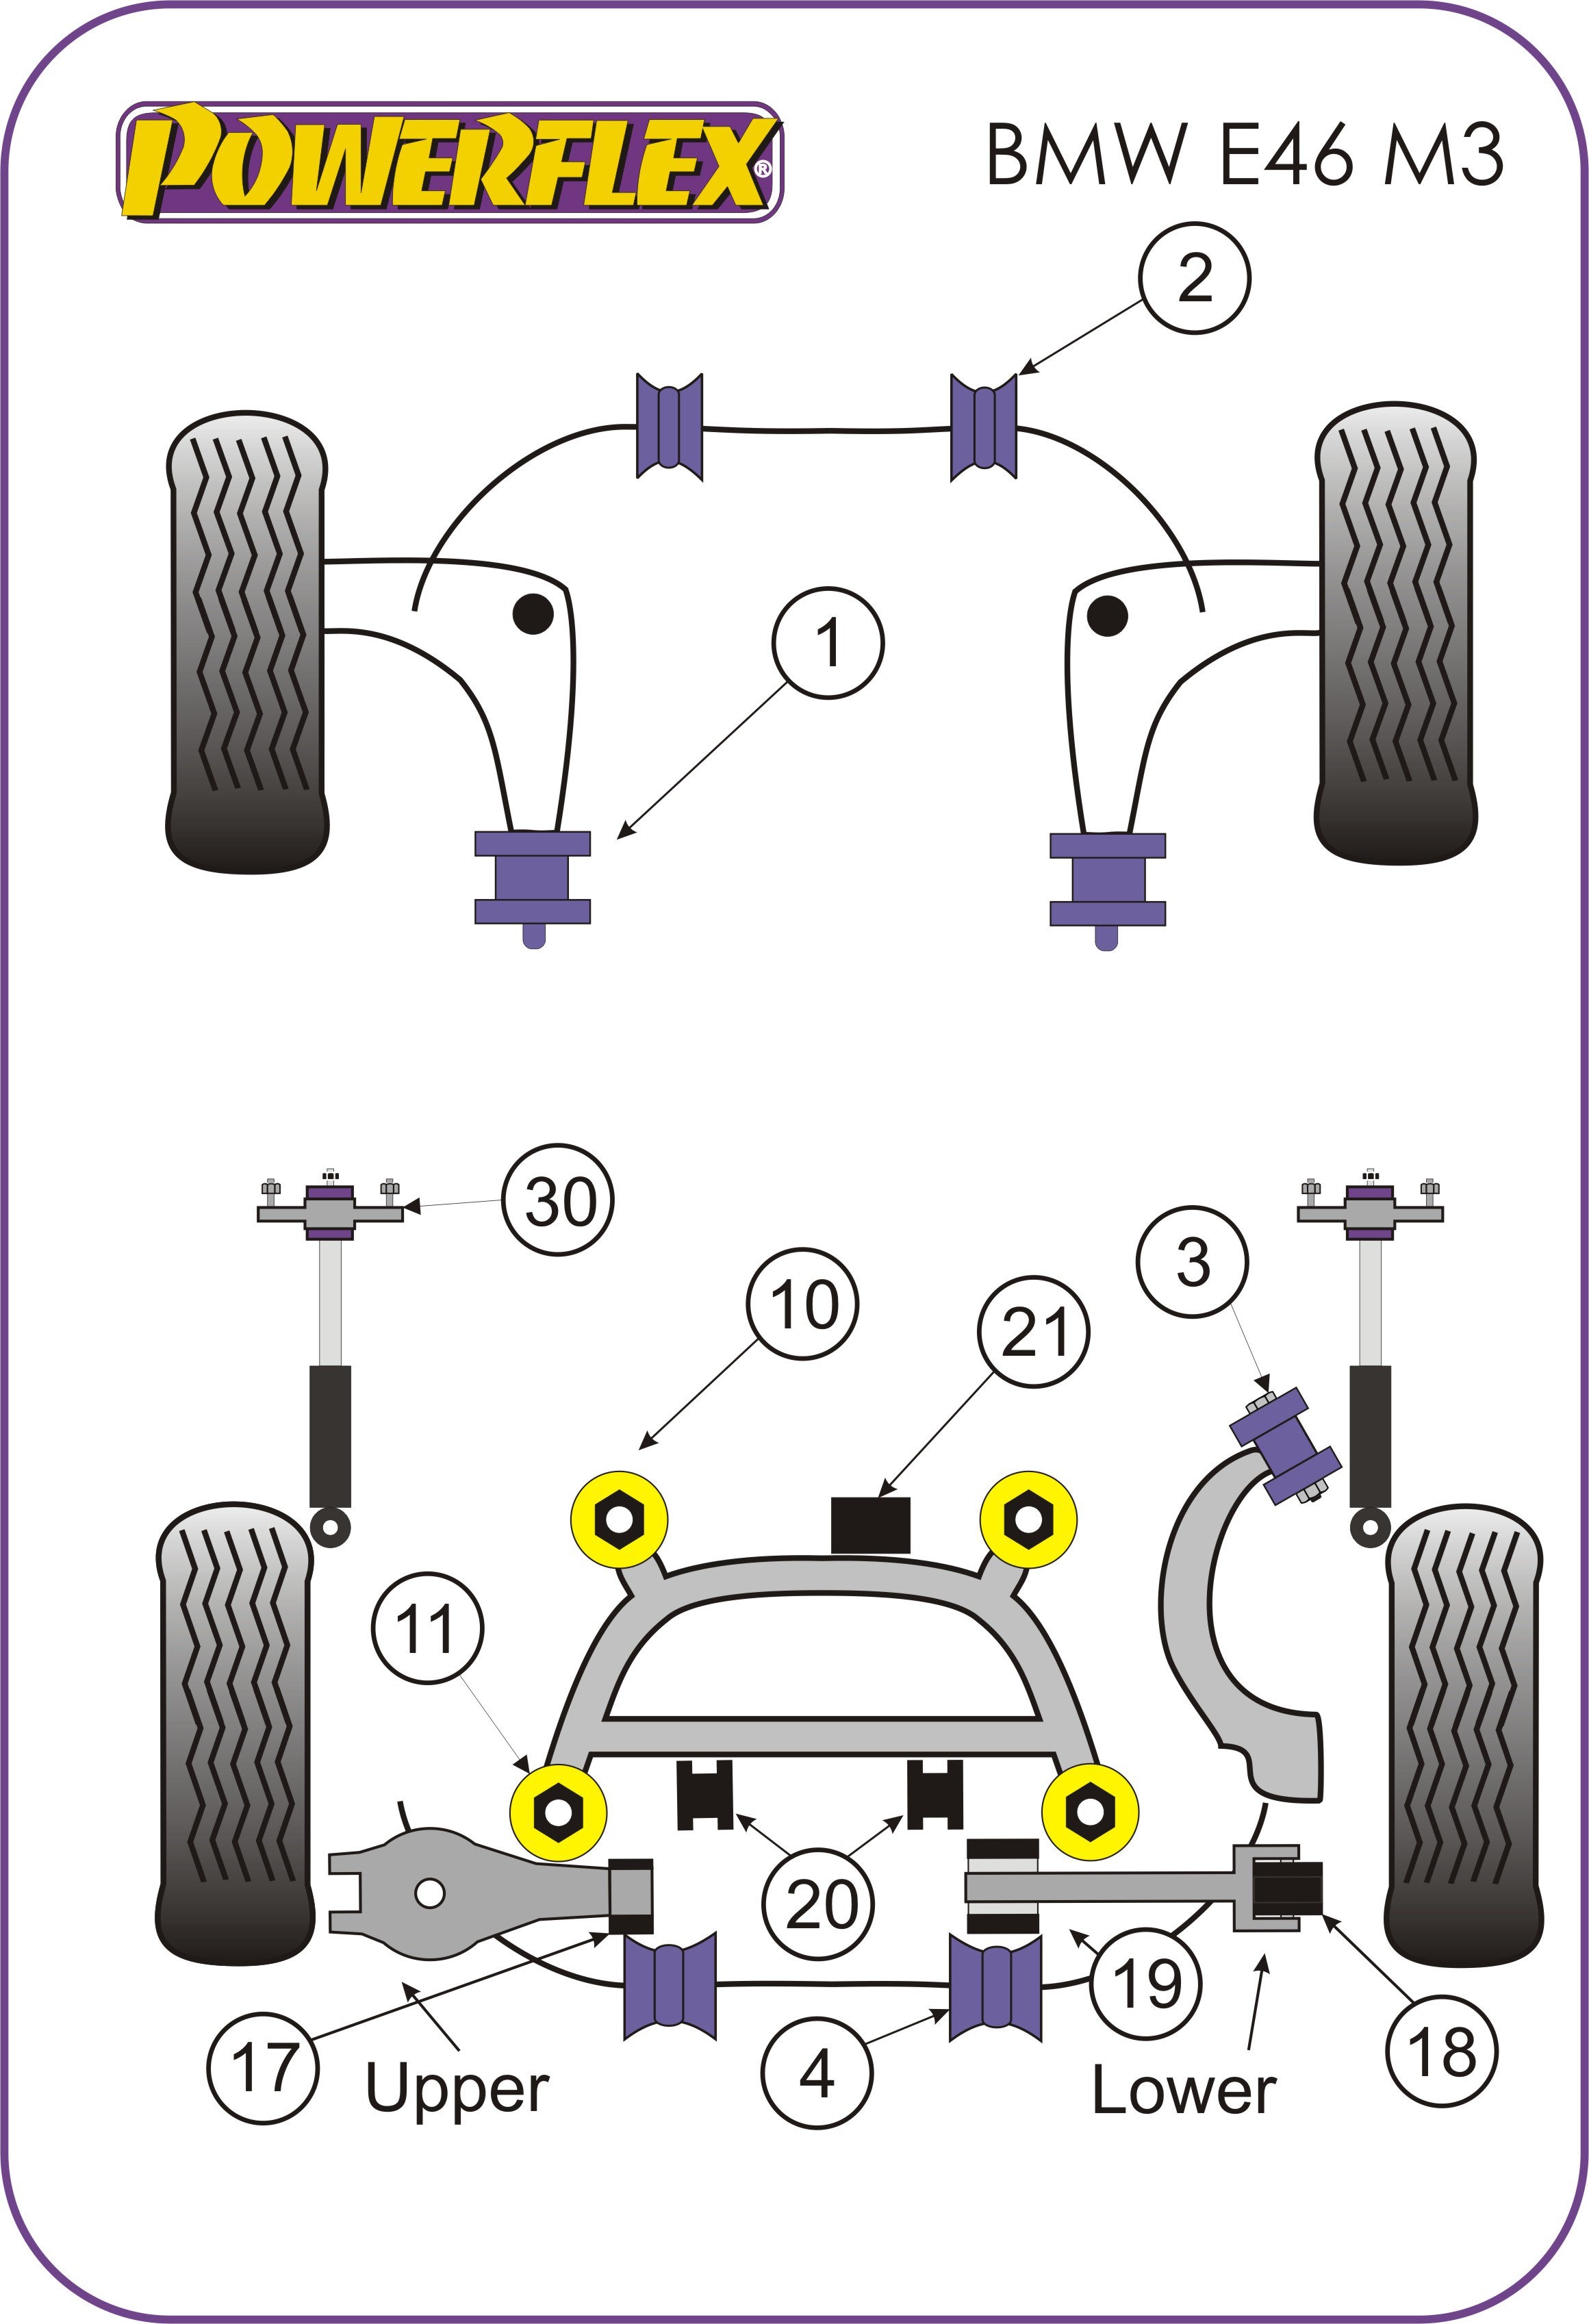 Car Suspension System Diagram Pfr5 5630 10 Road Series Pack Of 2 Powerflex Poly Bushes Of Car Suspension System Diagram